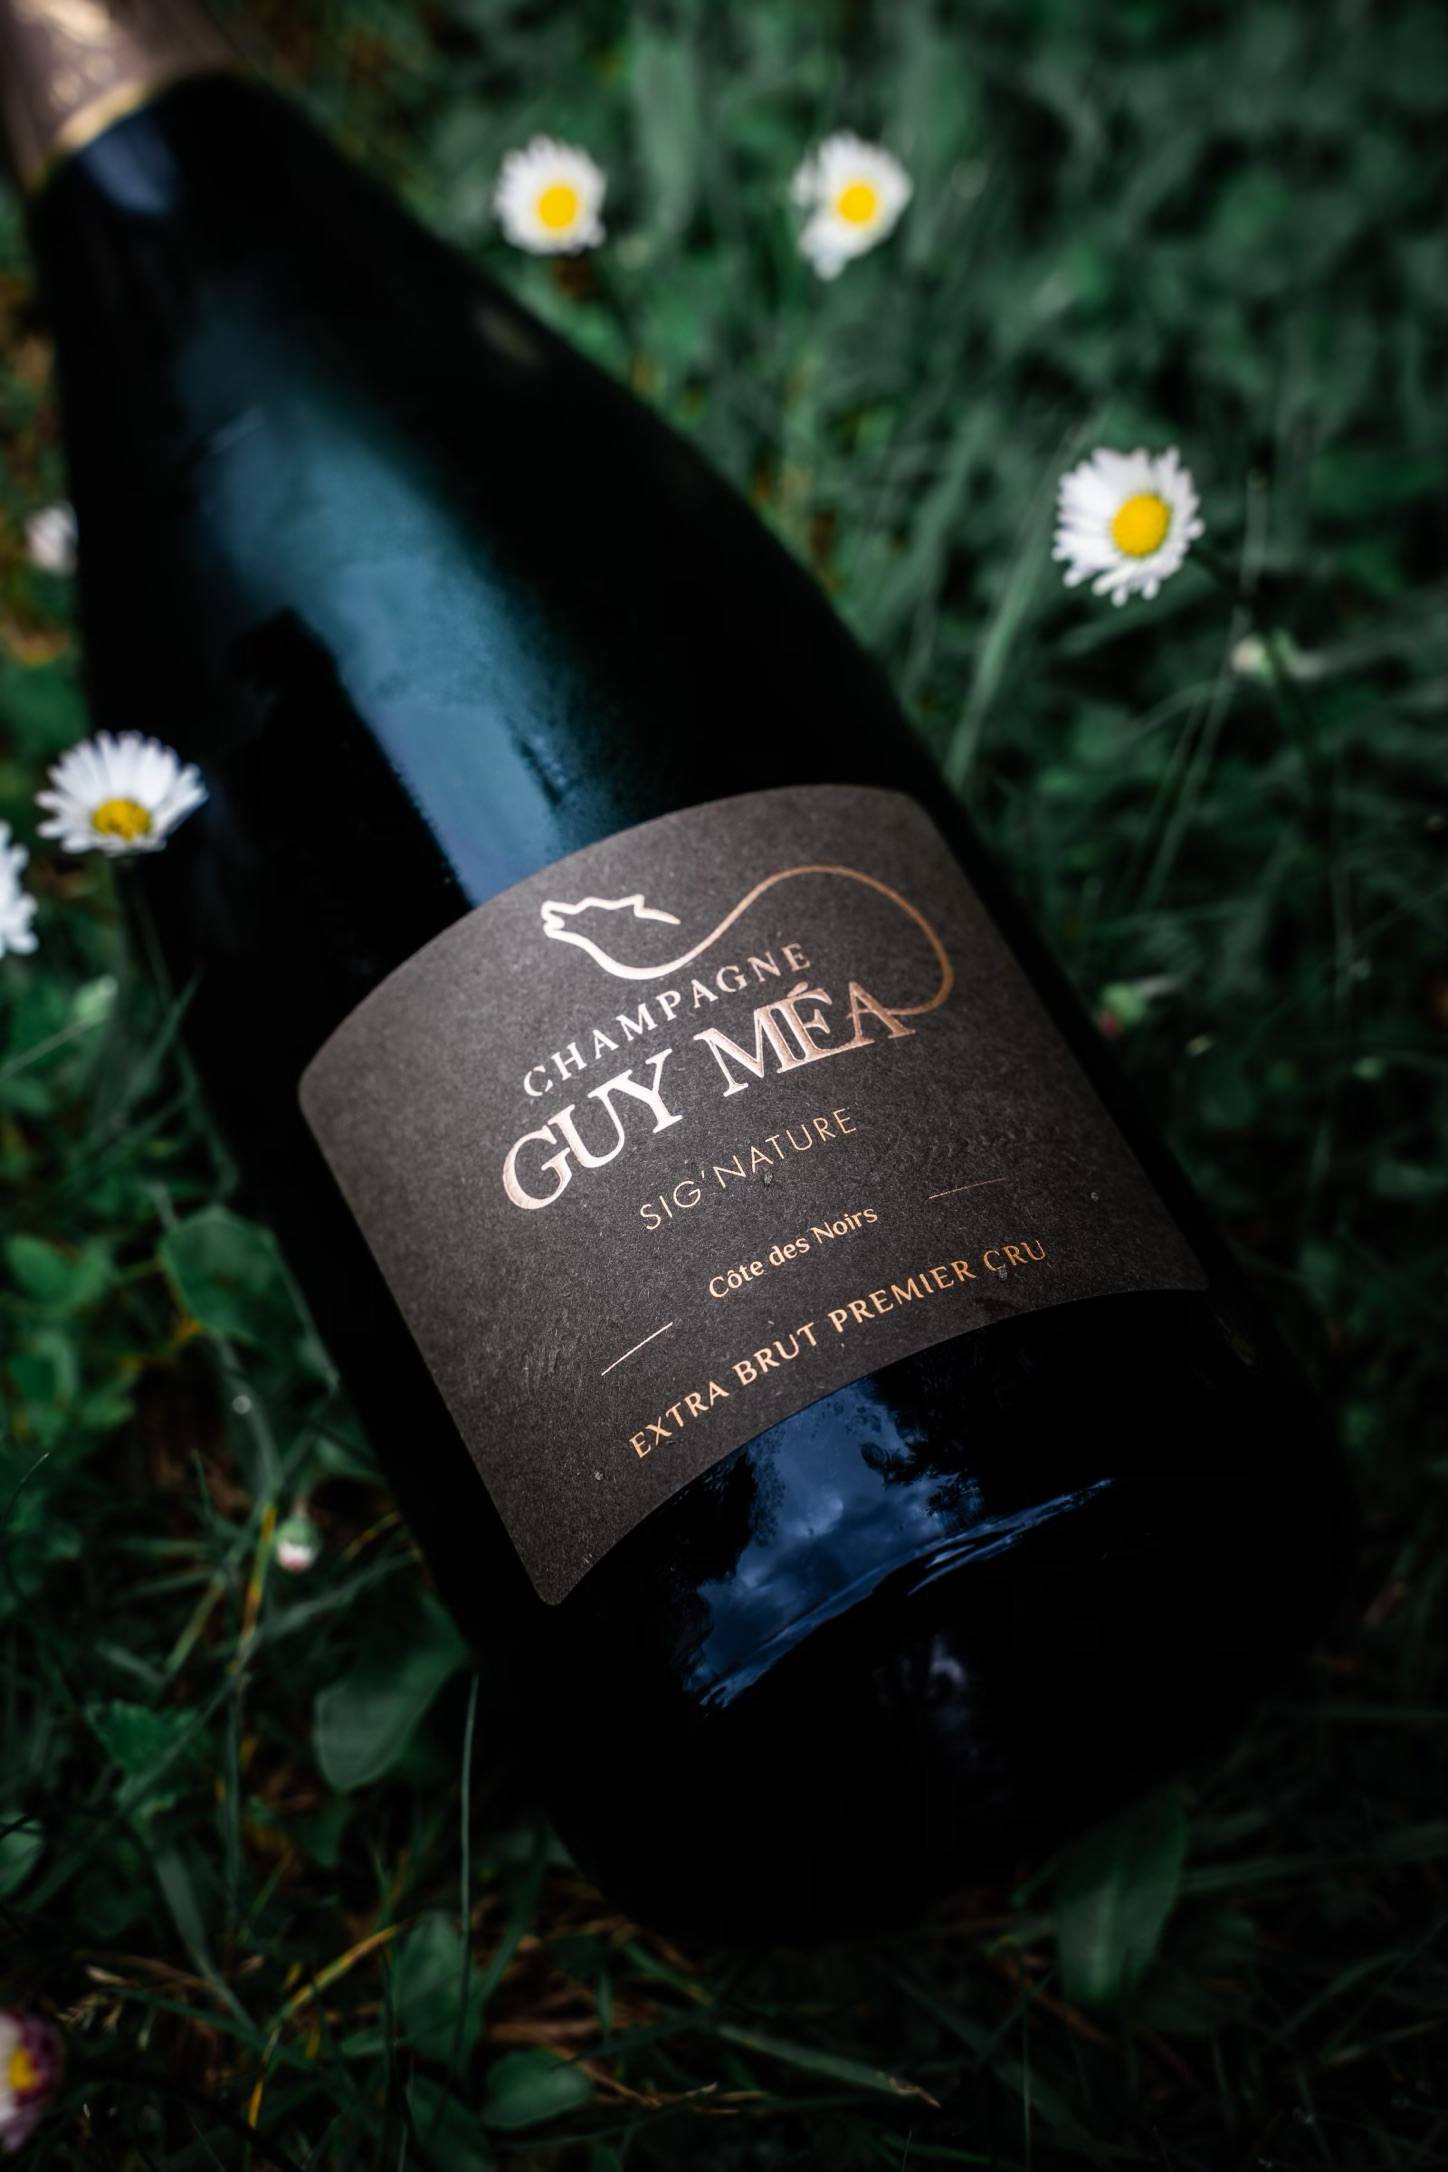 Sig’nature - Champagne Guy Mea